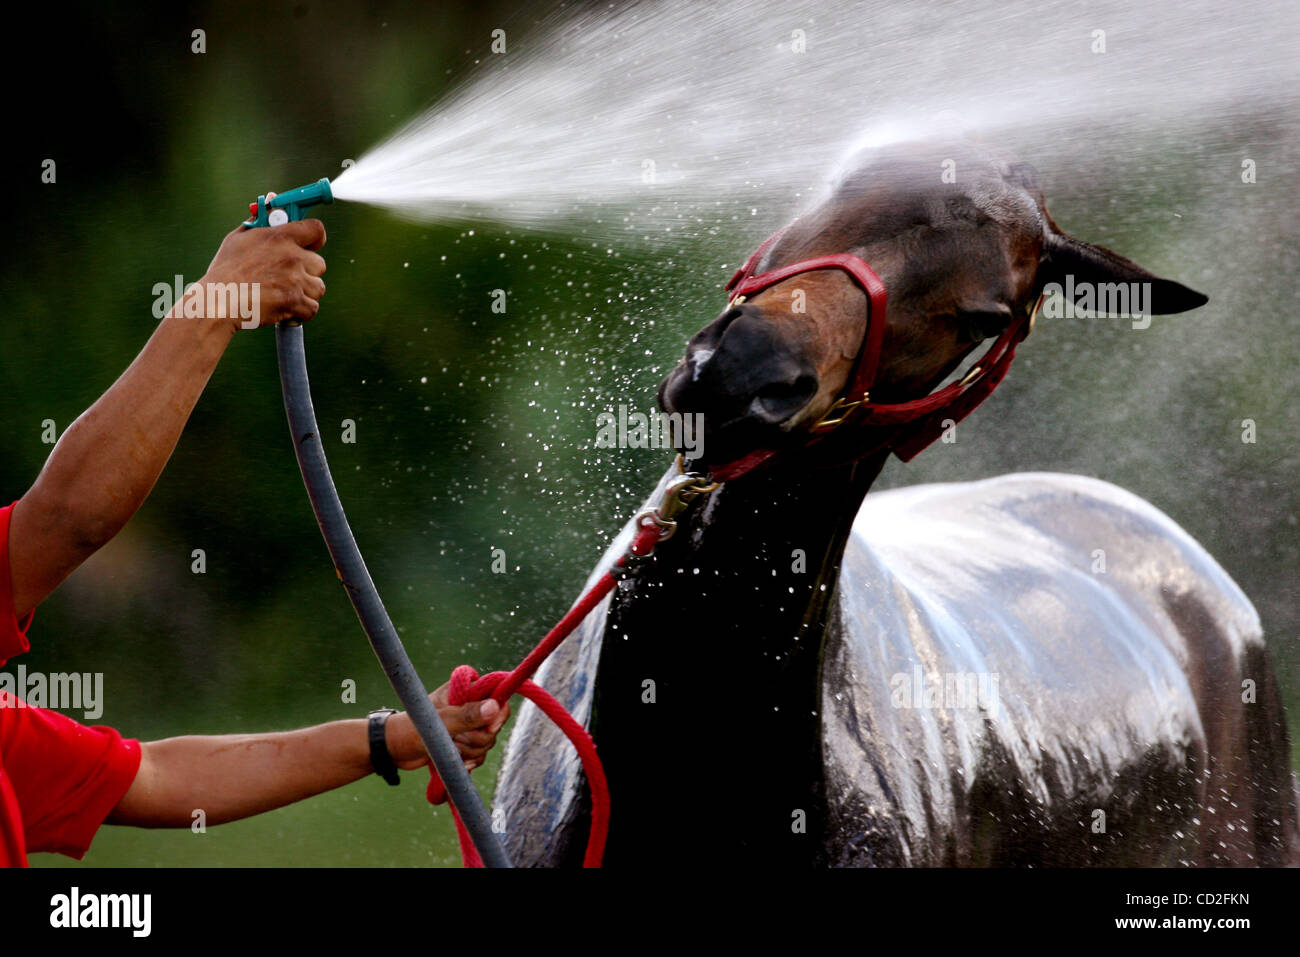 030208 spt polo 2 Staff Photo by Gary Coronado/The Palm Beach Post 0049813A With Story by Marcus Nelson--Wellington--Jesus Romero (cq), handler for Isla Carroll, hoses down Marina during the finals of the CV Whitney Cup at the International Polo Club Palm Beach in Wellington Sunday. Stock Photo